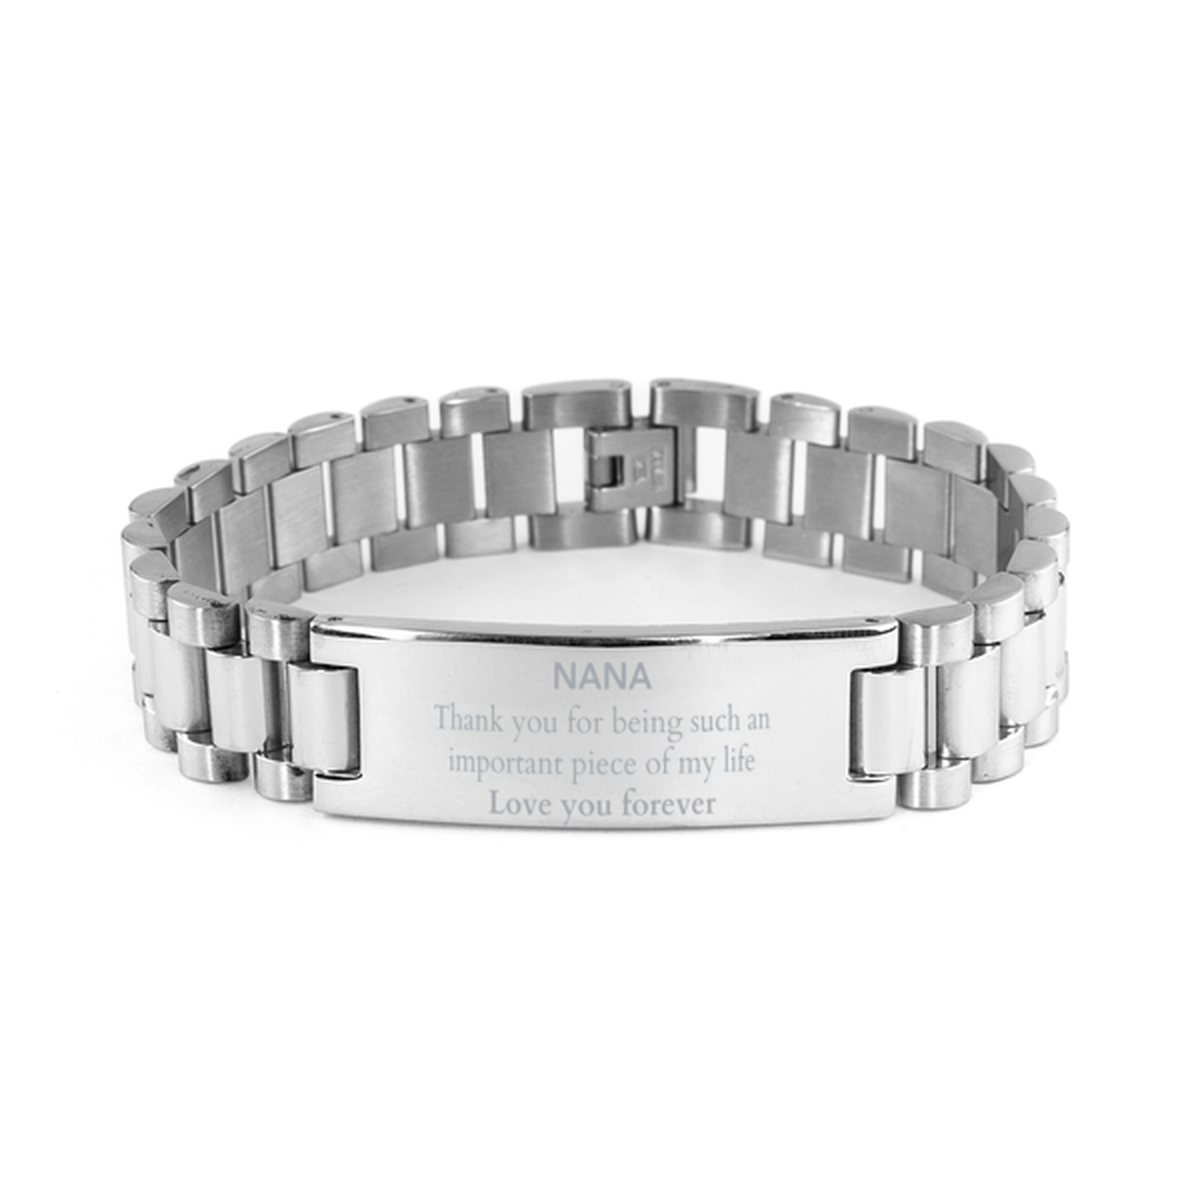 Appropriate Nana Ladder Stainless Steel Bracelet Epic Birthday Gifts for Nana Thank you for being such an important piece of my life Nana Christmas Mothers Fathers Day